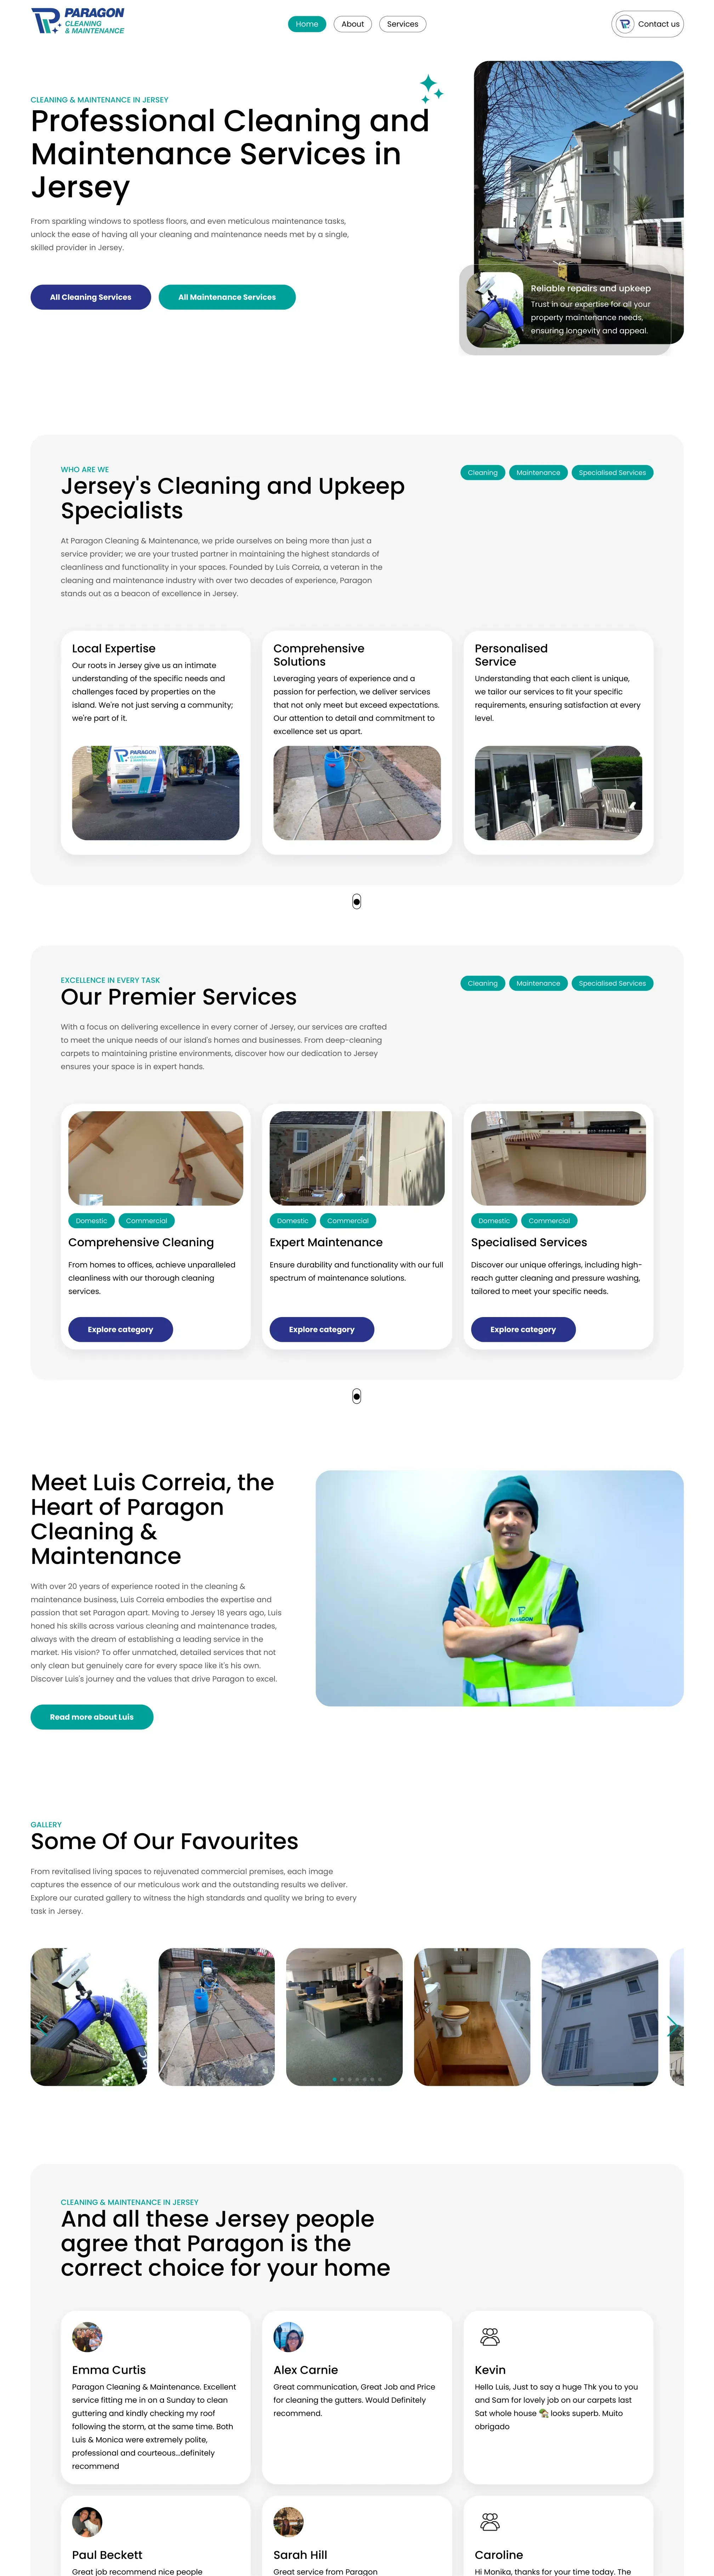 Paragon Cleaning & Maintenance Home Page